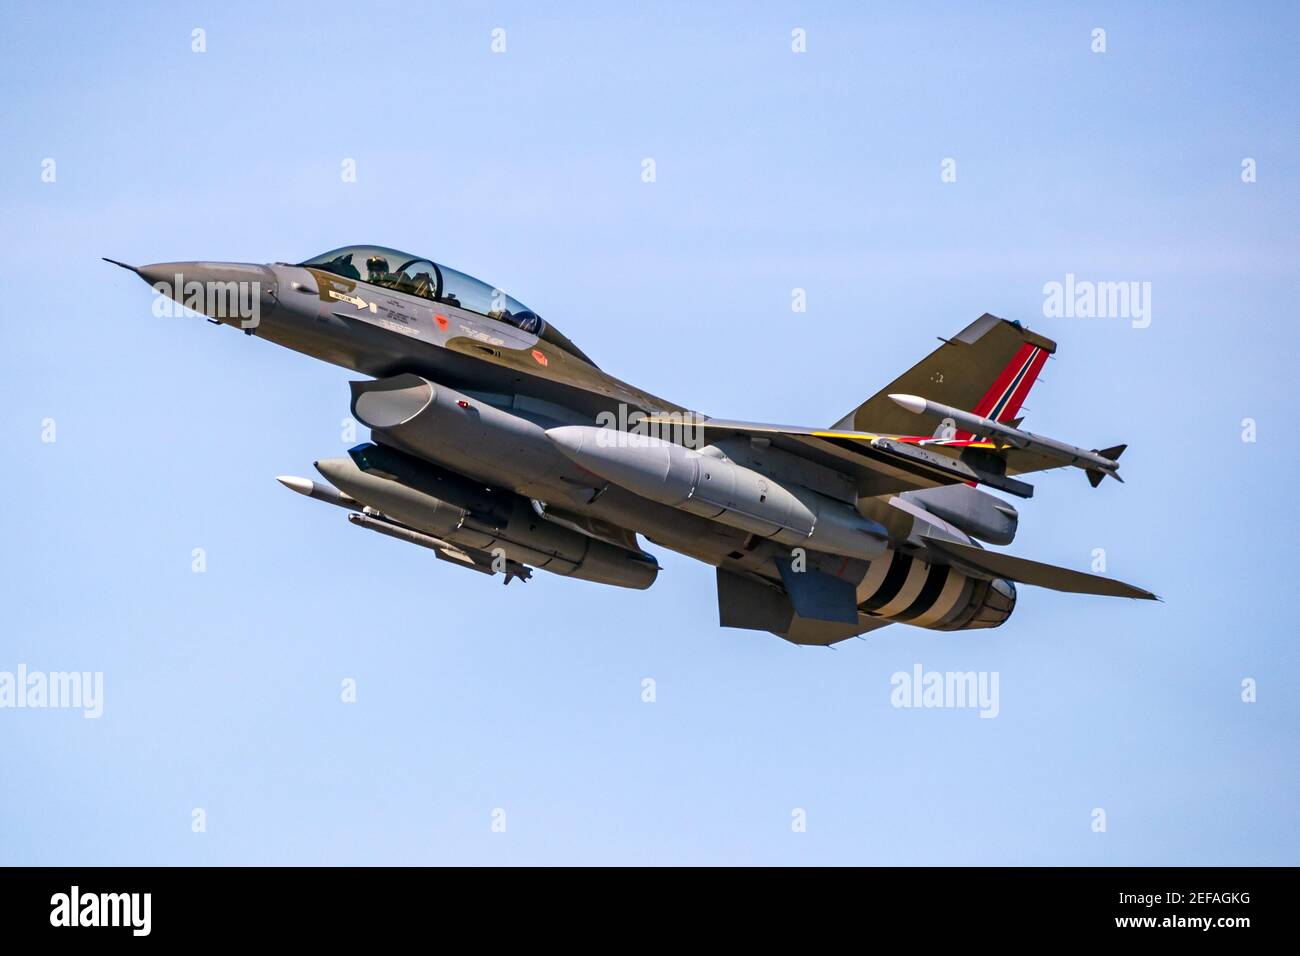 Norwegian Air Force F-16 in the colors of a WW2 Spitfire in flight. Belgium - September 14, 2019. Stock Photo